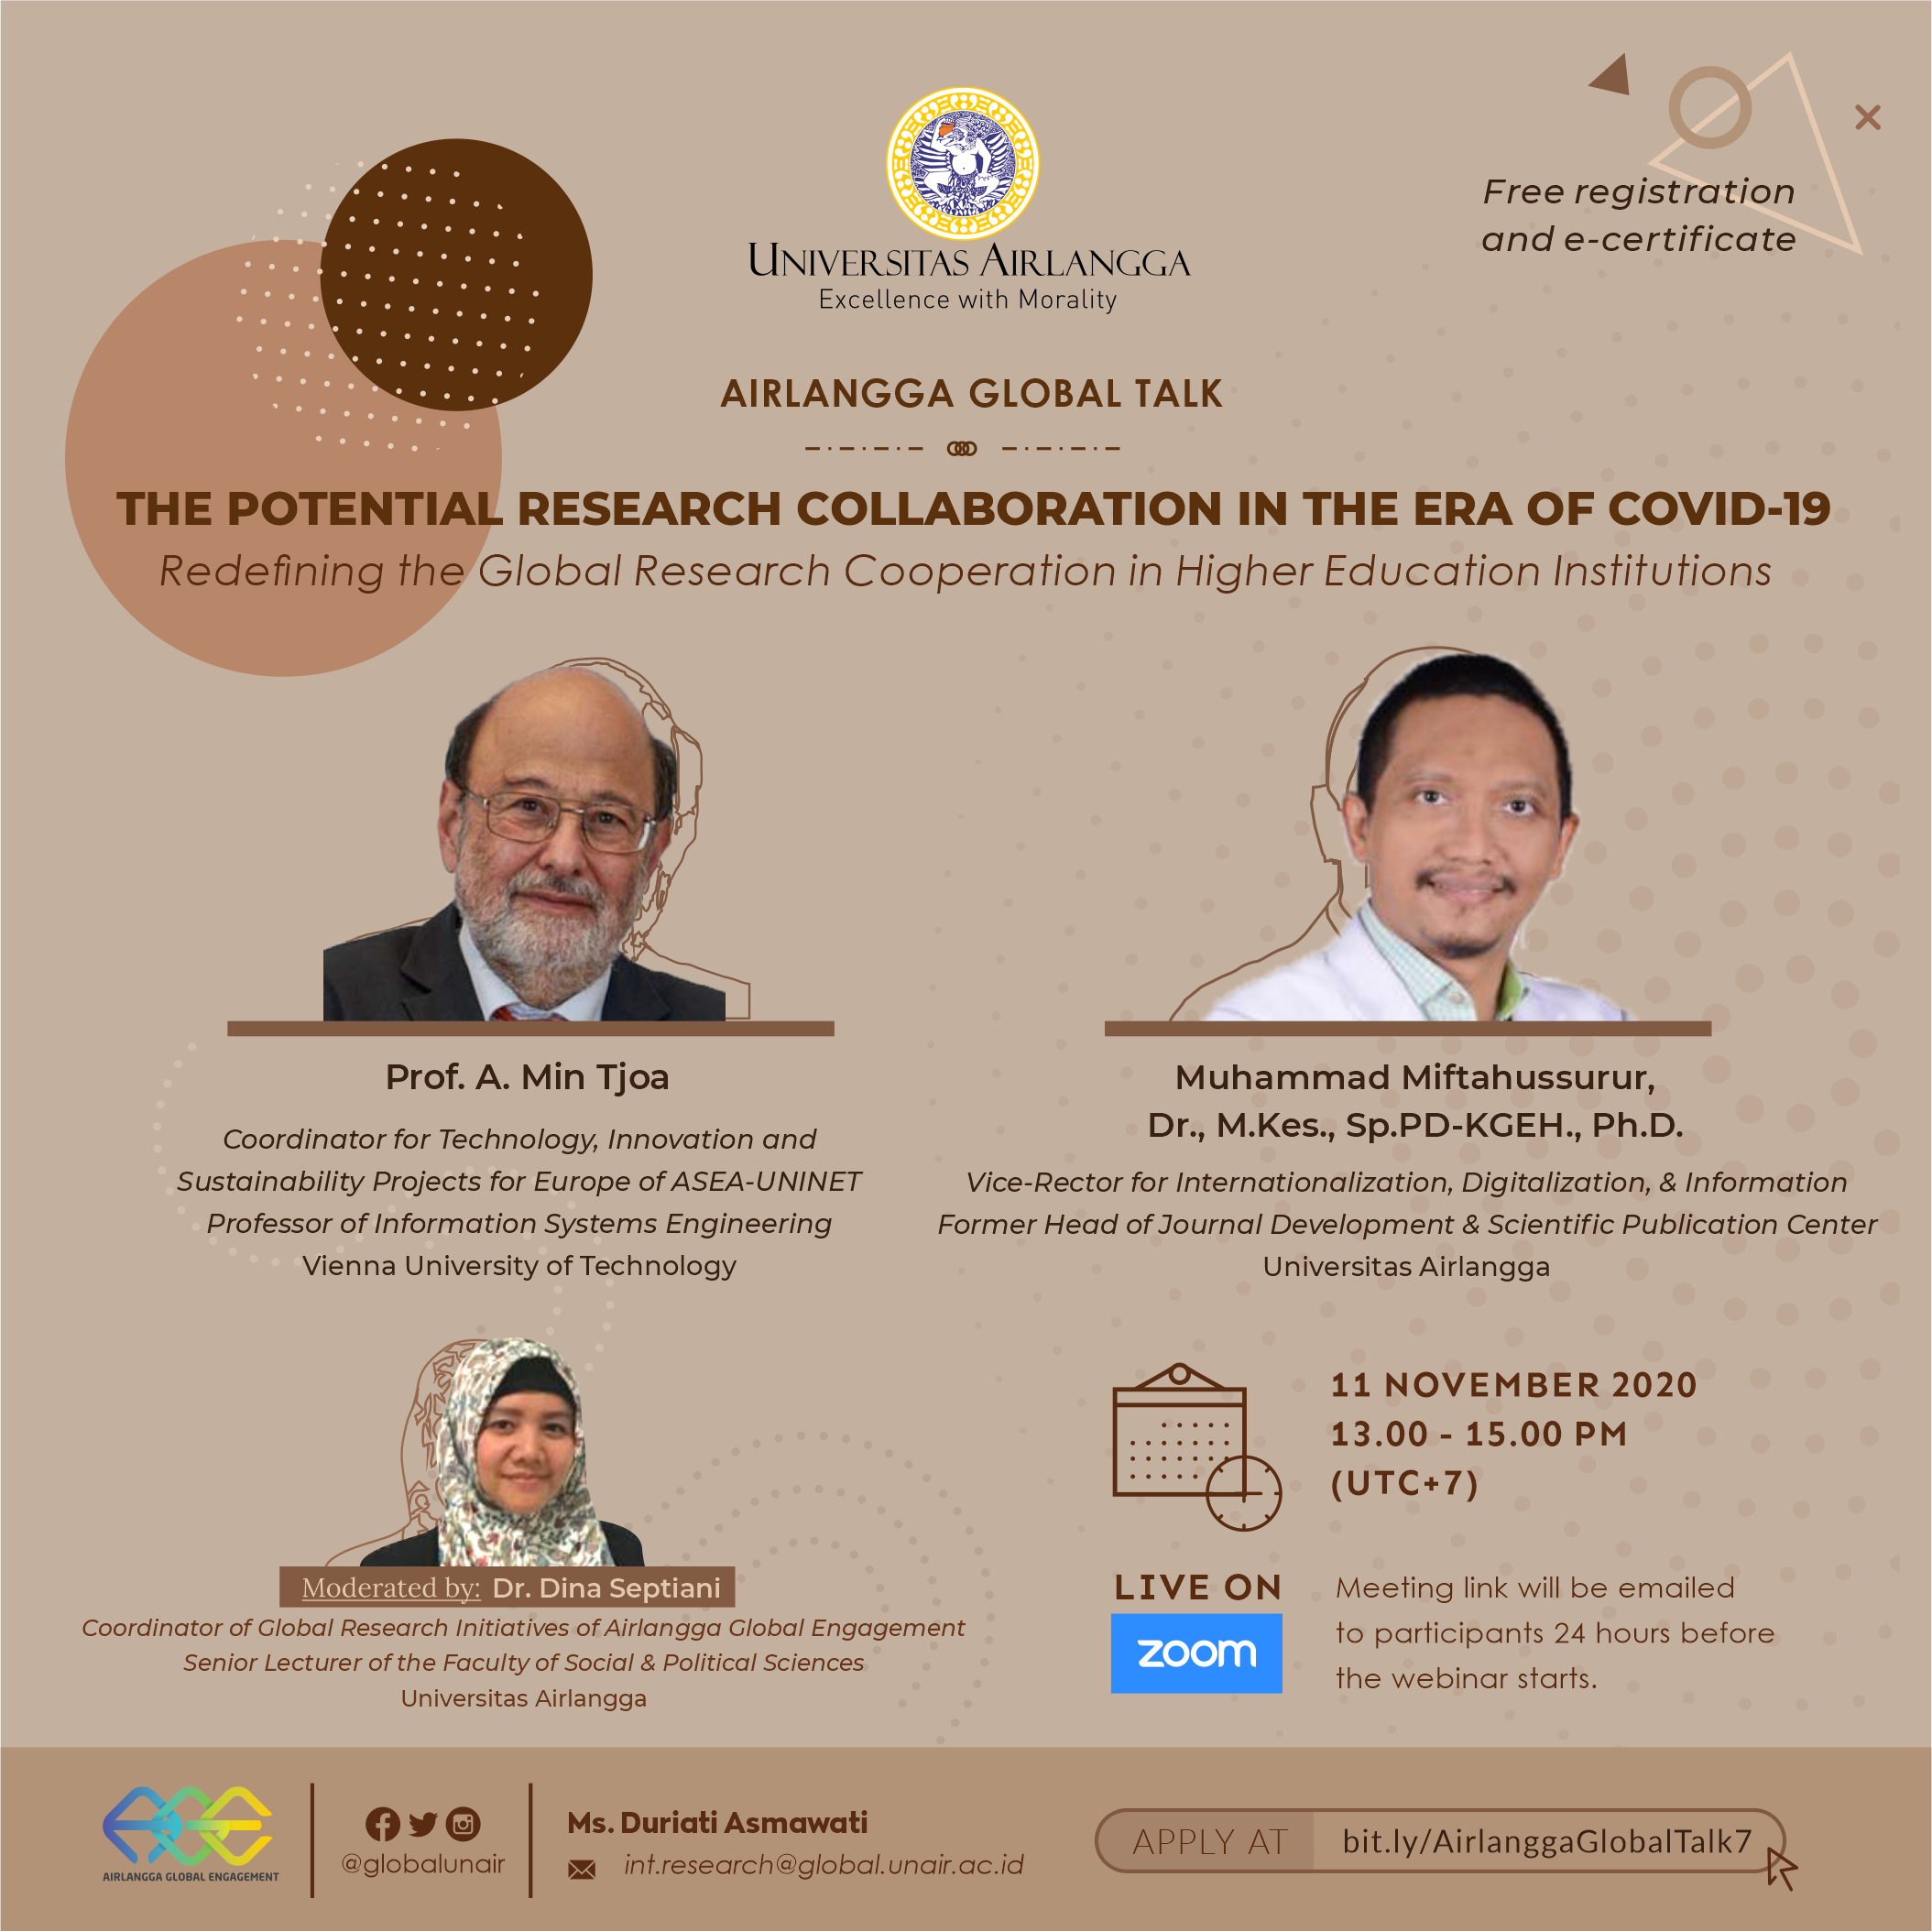 [Webinar] The Potential Research Collaboration in the Era of Covid-19: Redefining the Global Research Cooperation in Higher Education Institutions